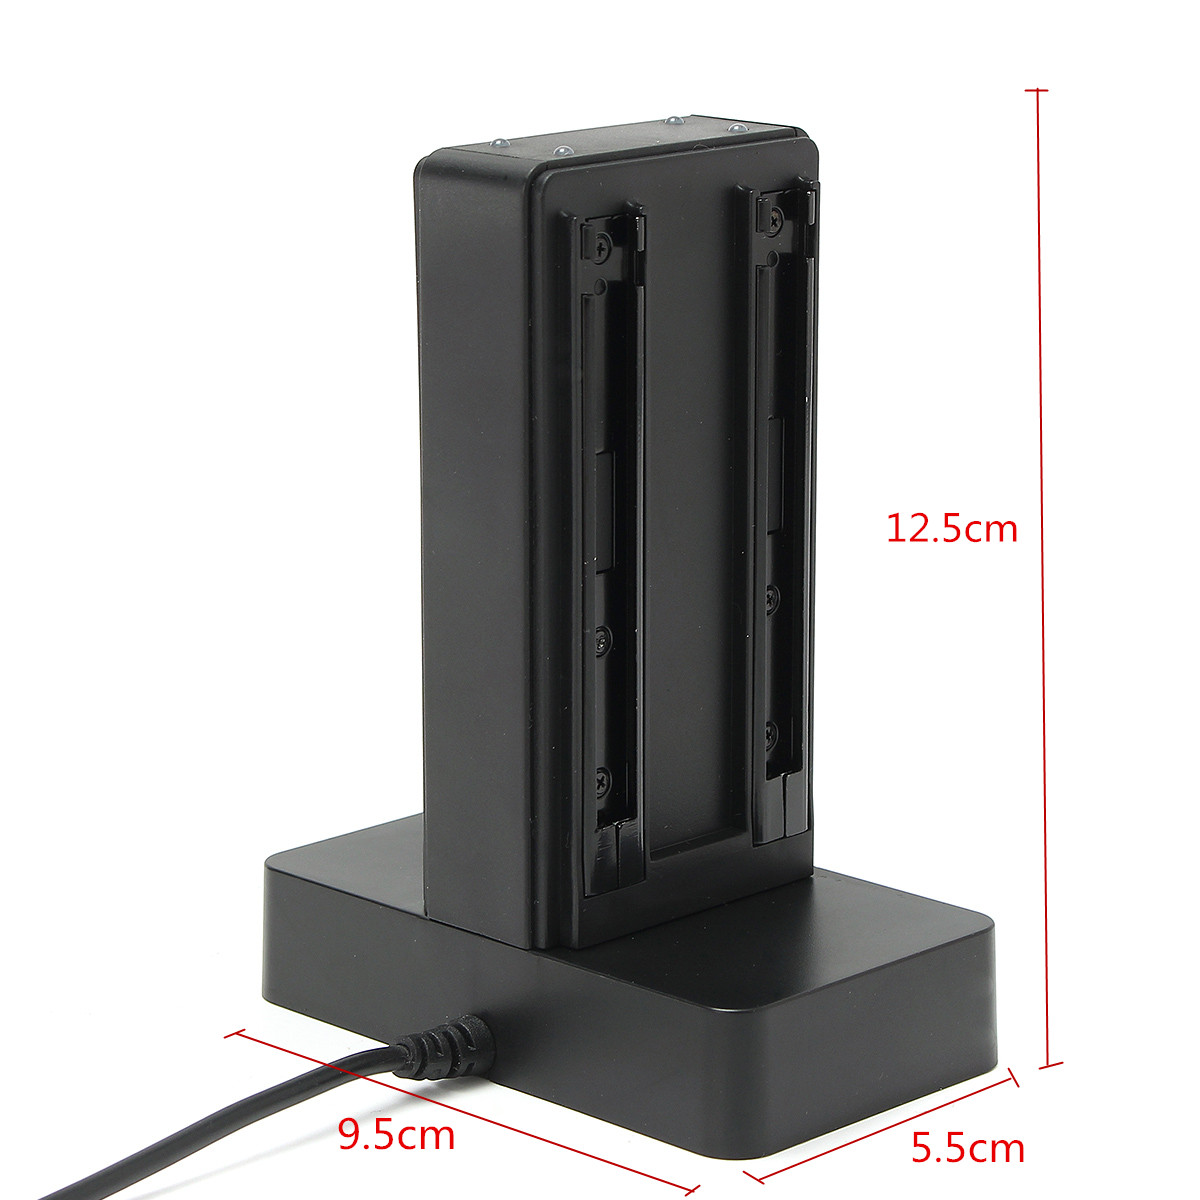 Charging Dock Station Charger Stand For Nintendo Switch 4 Joy-Con Controller 13